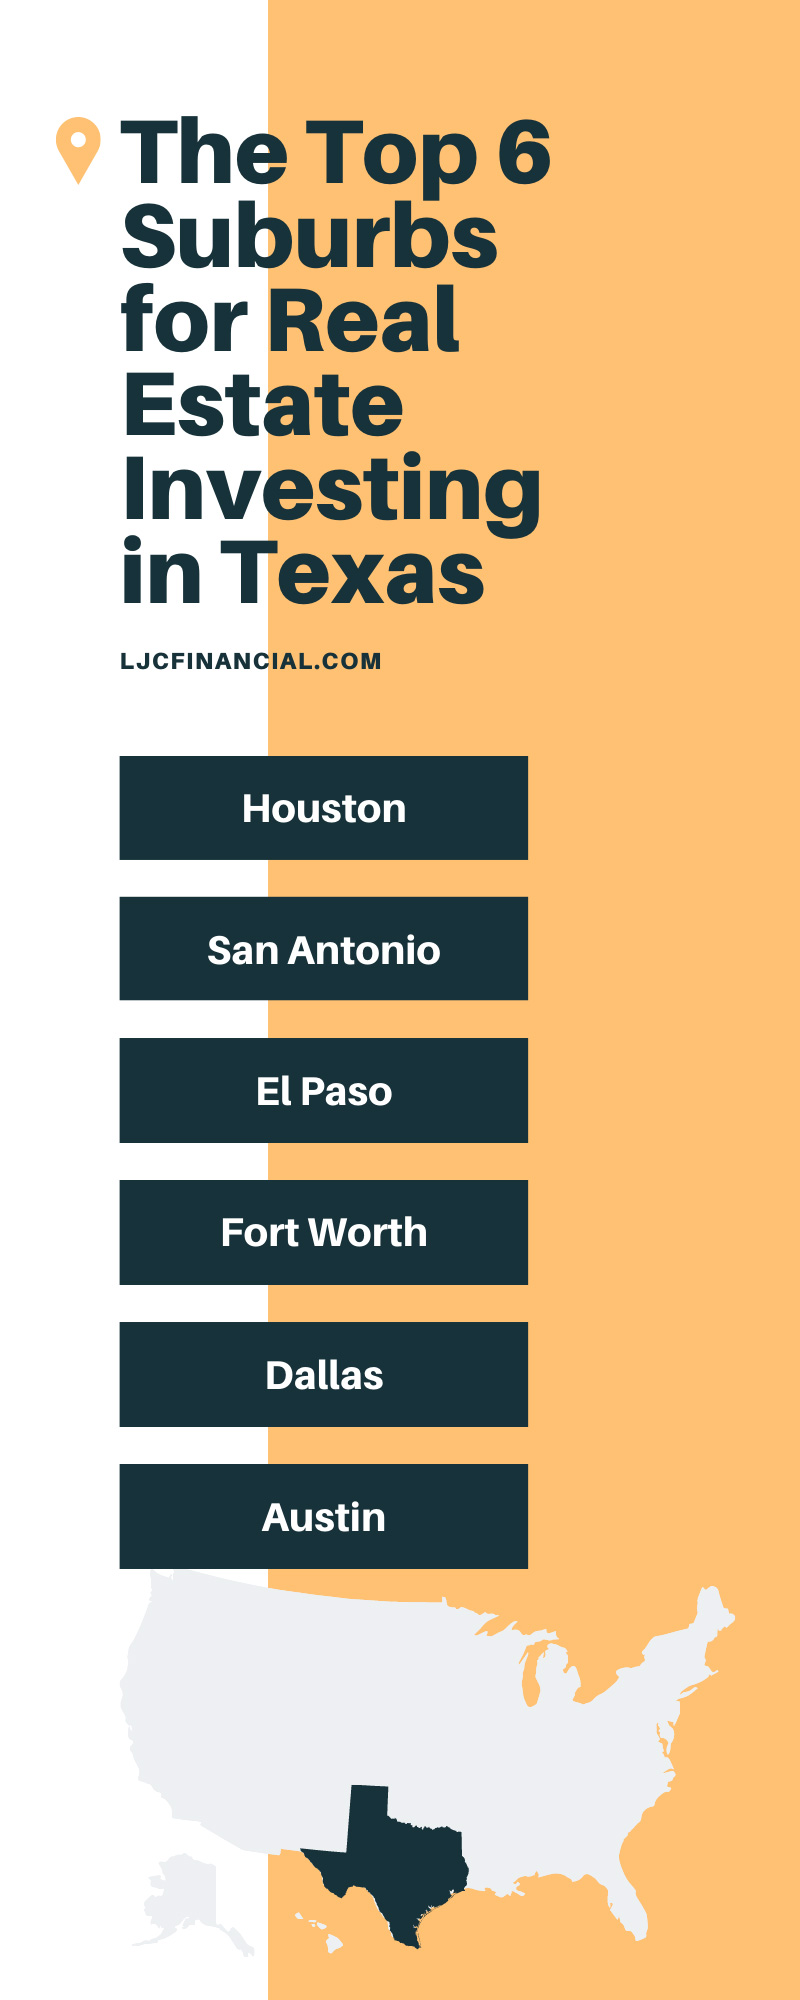 The Top 6 Suburbs for Real Estate Investing in Texas